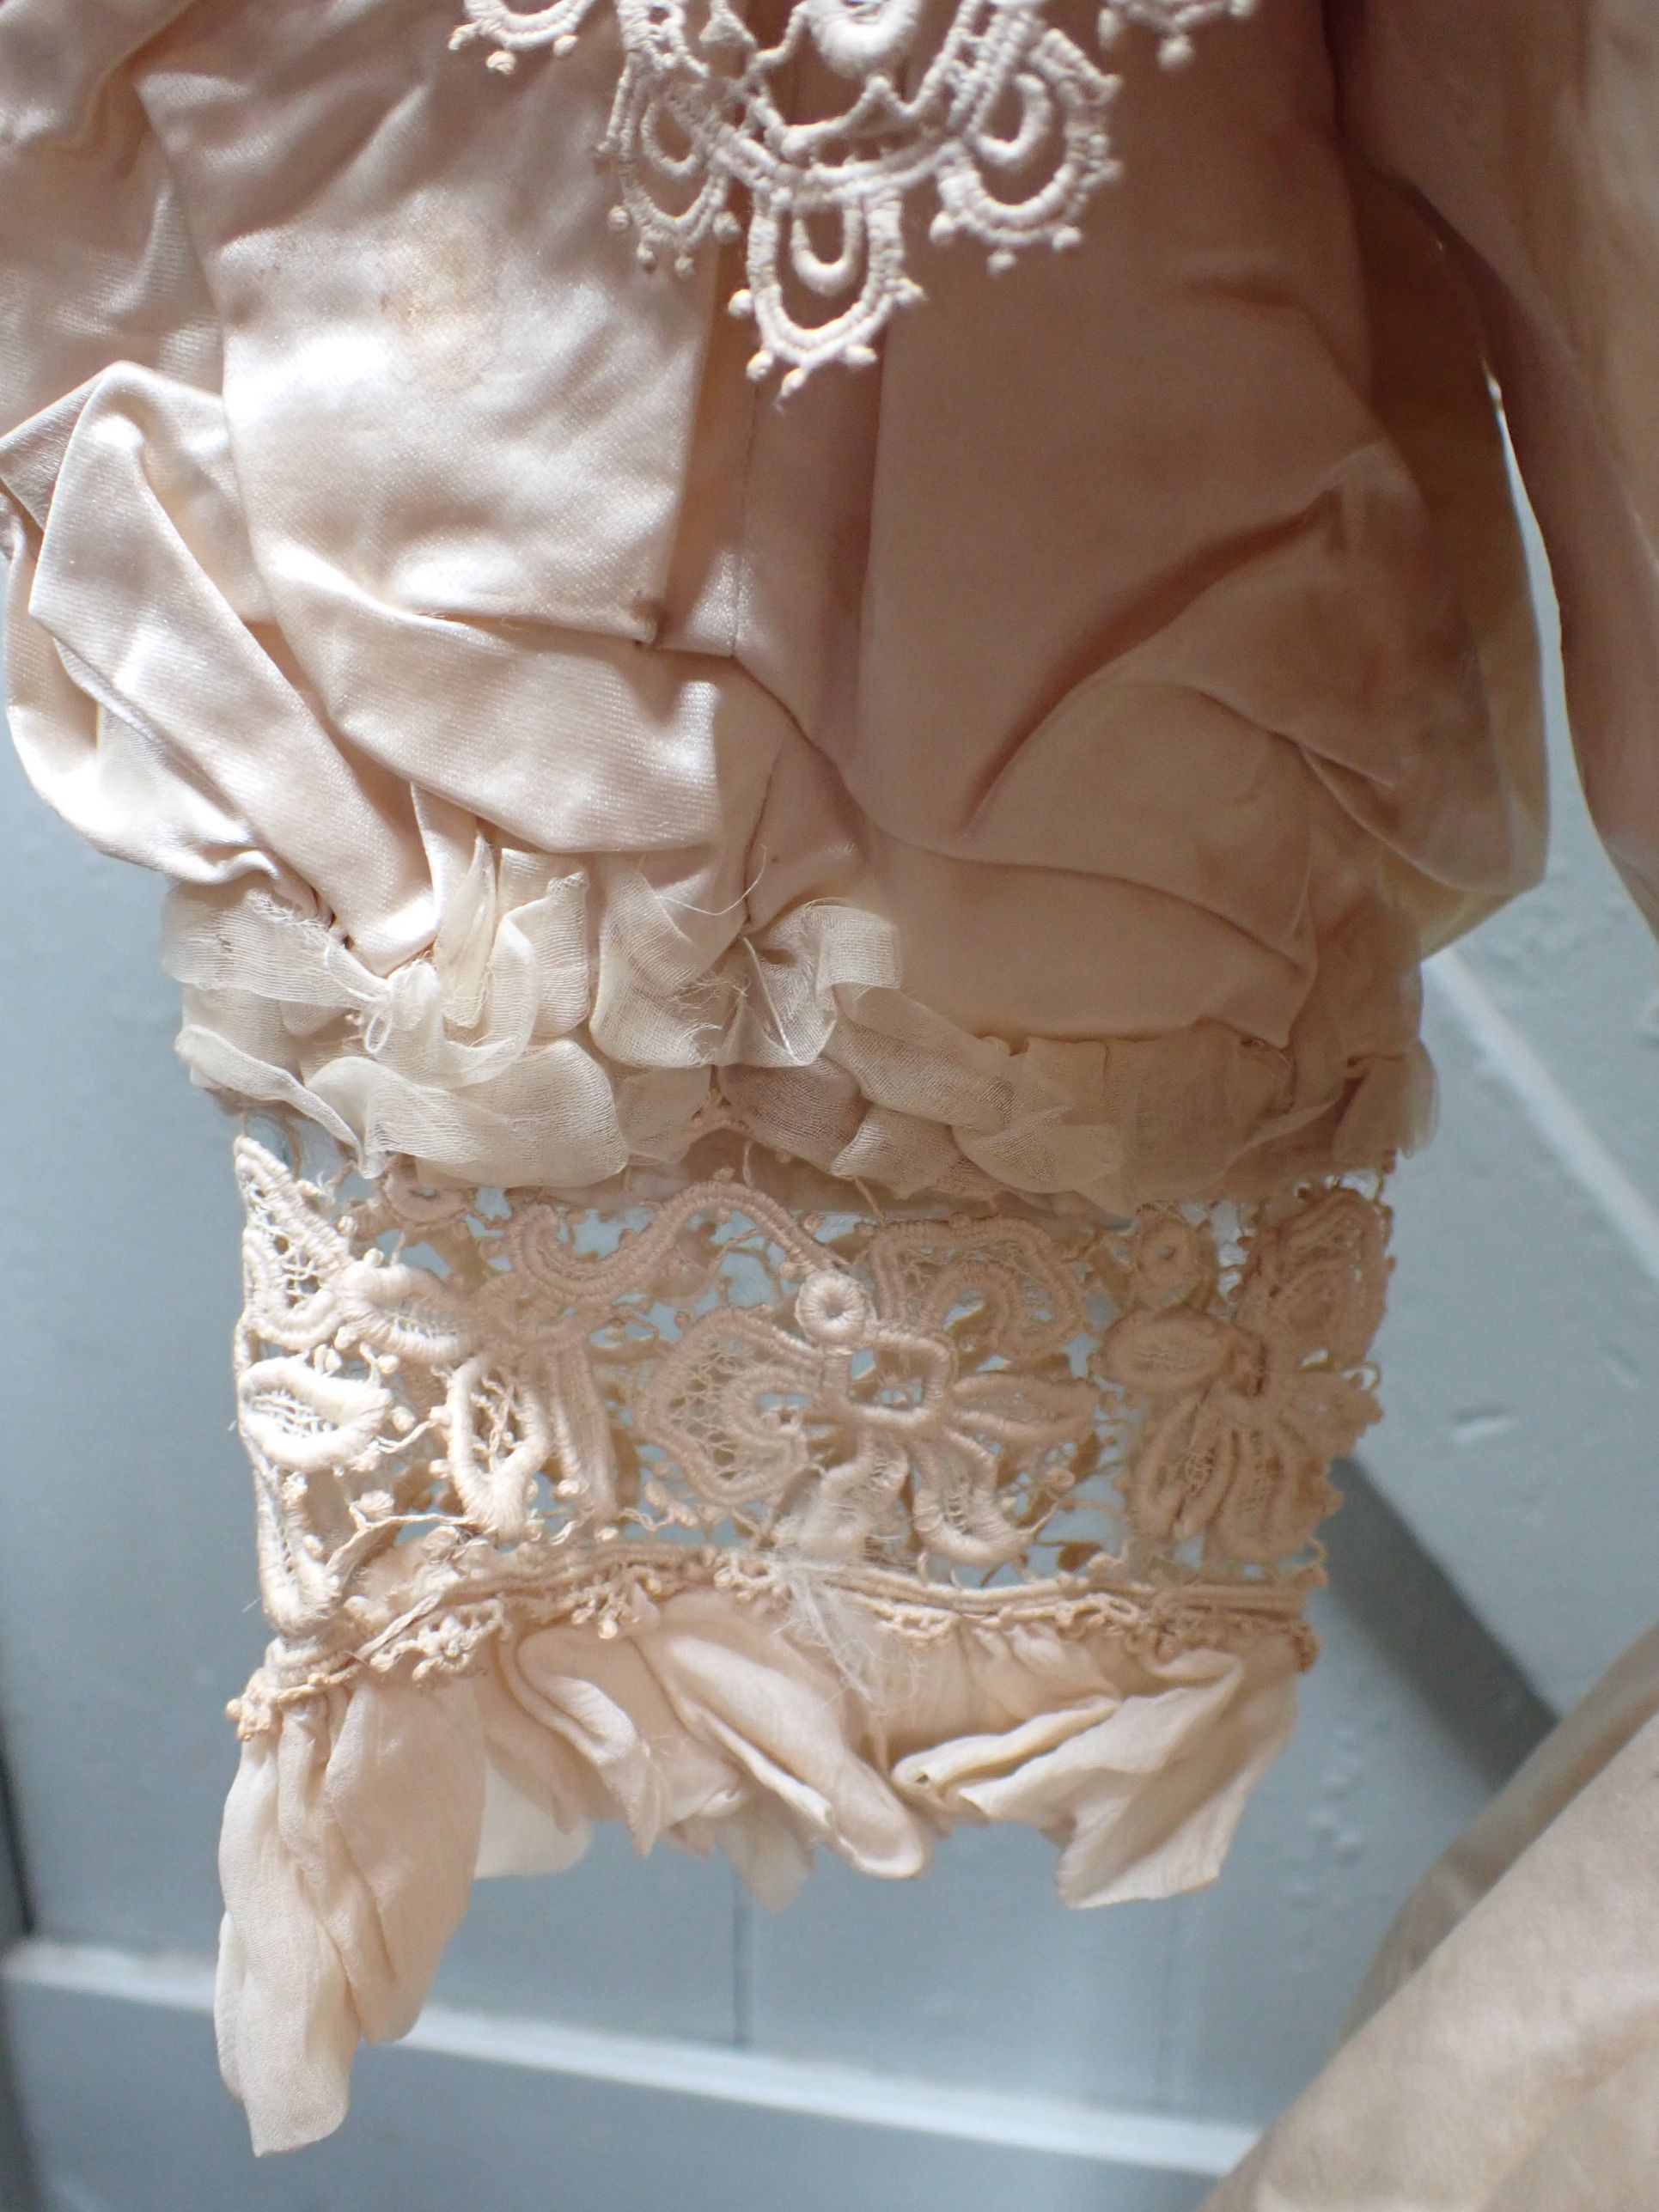 A LATE VICTORIAN SILK WEDDING DRESS, WITH LACE COLLAR AND PANELS - Image 4 of 11